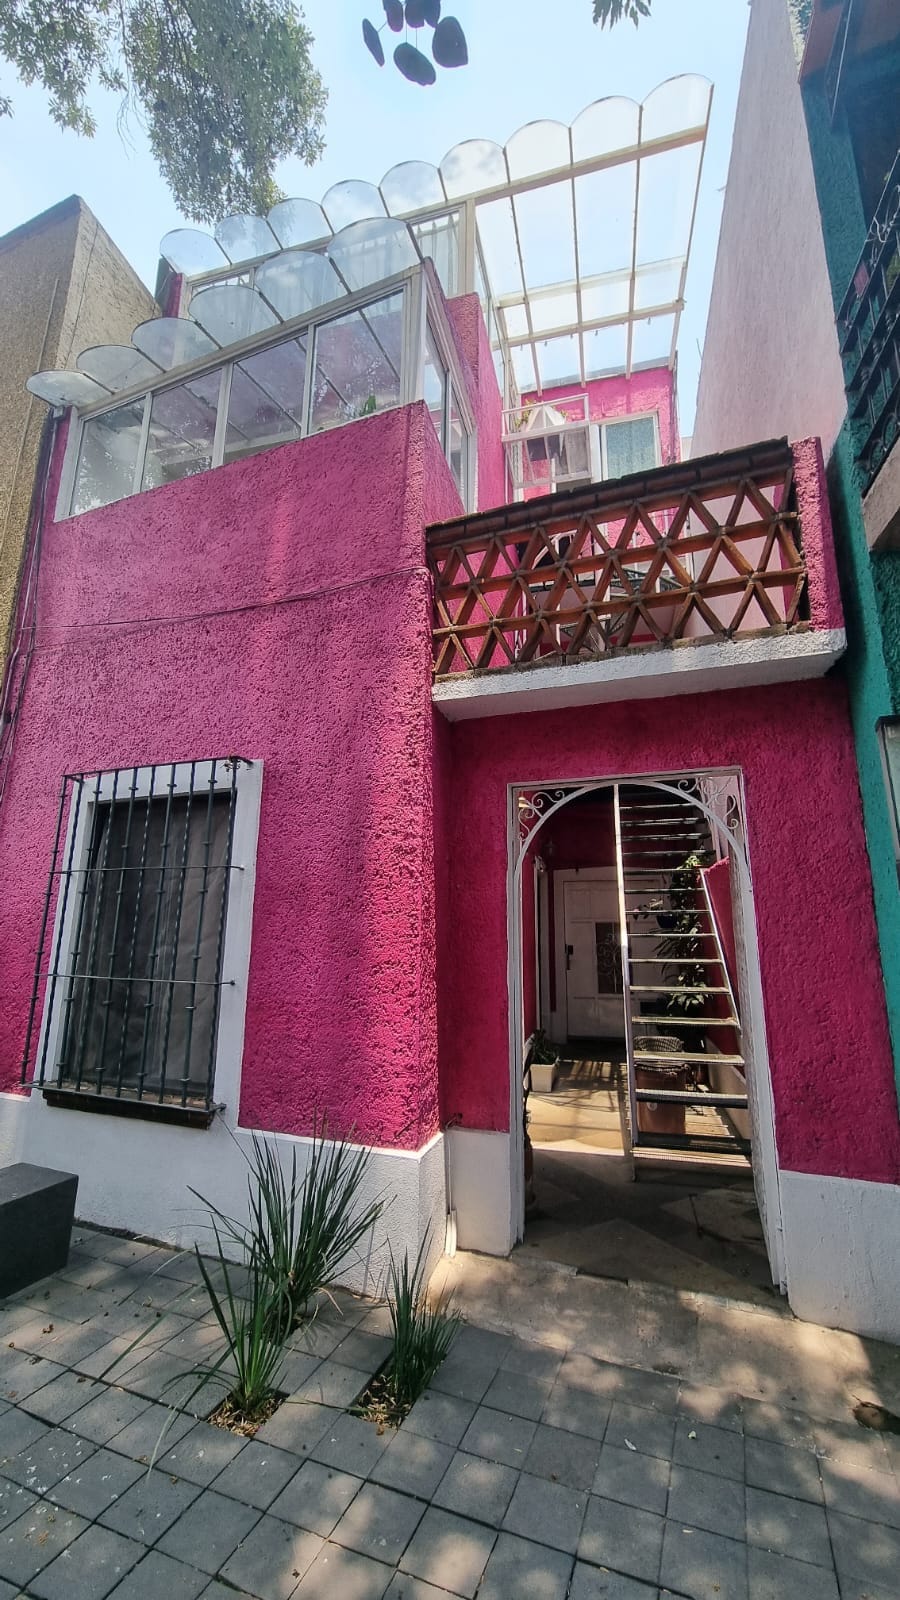 Ambar Loft. A jewl right on the heart of Coyoacan